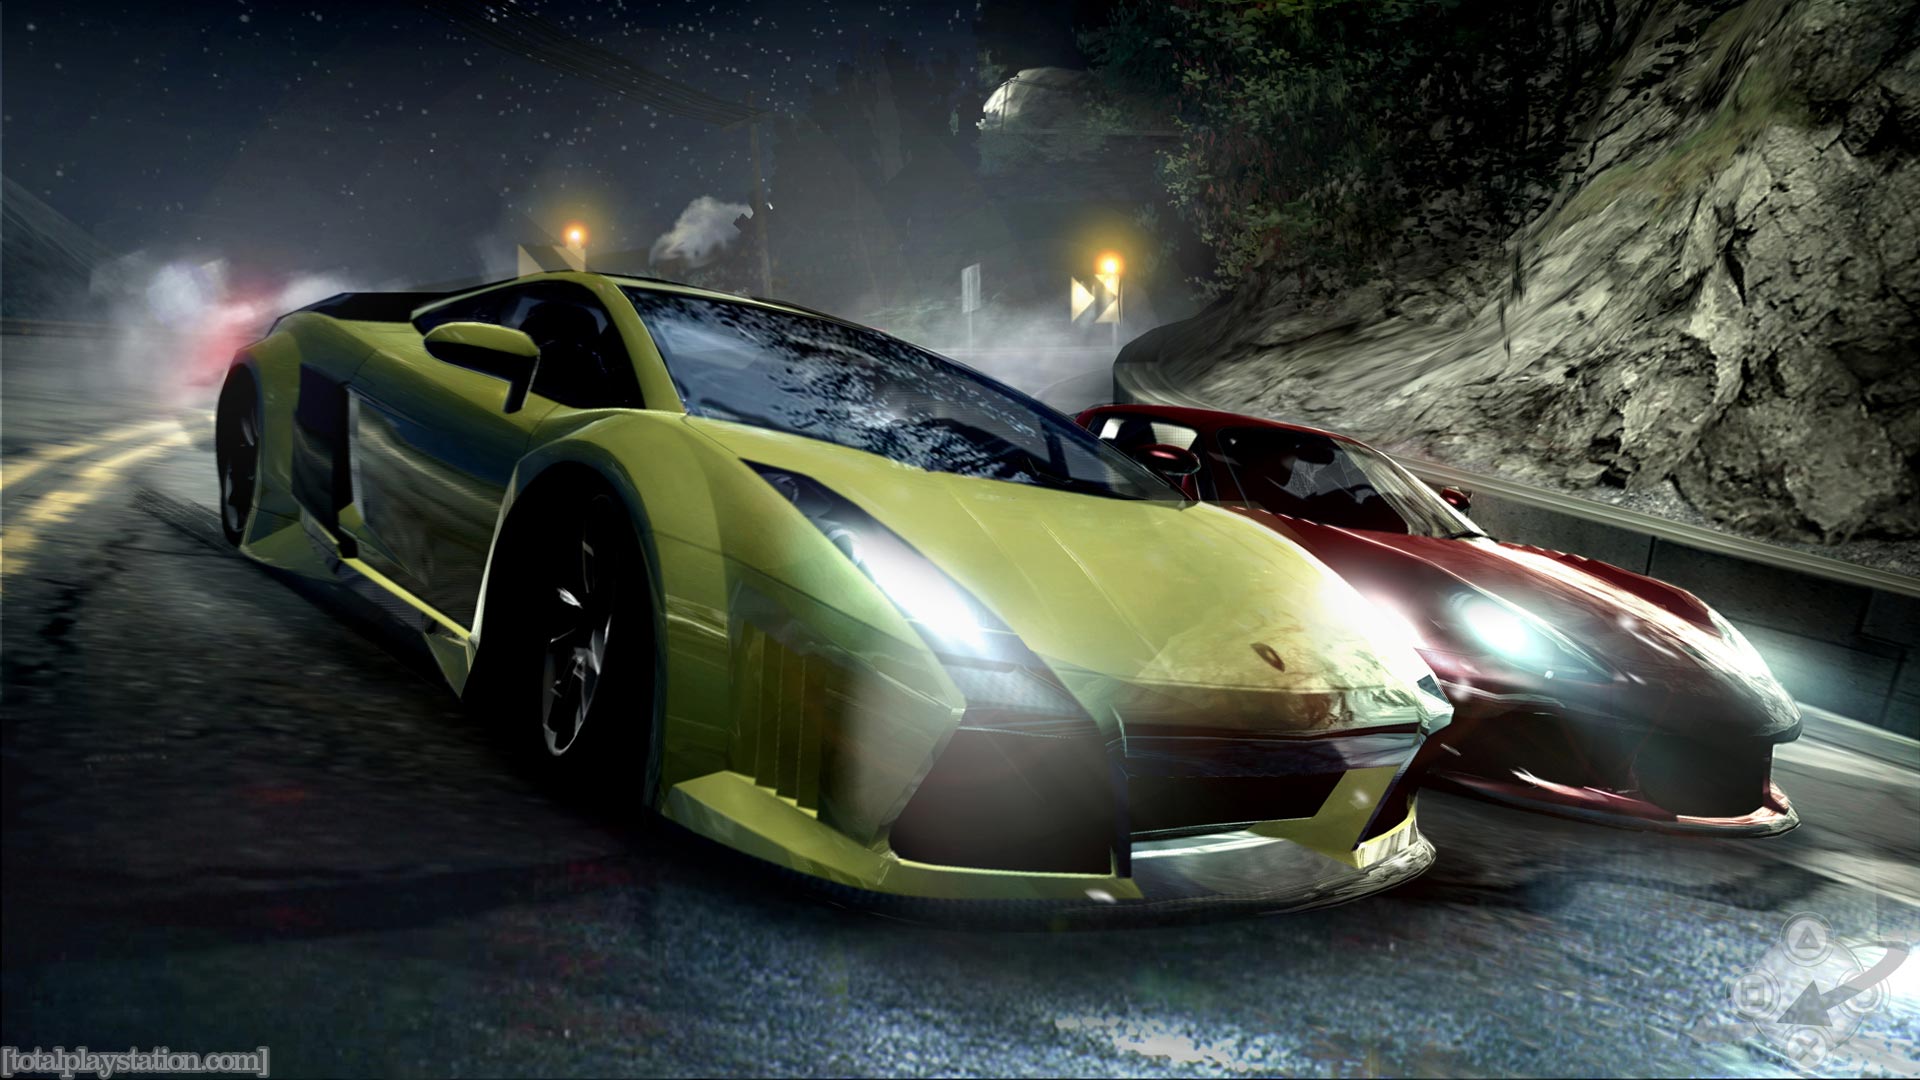 Need For Speed Carbon Girl 2 Wallpapers HD Wal 13891 HD Wallpaper 1920x1080